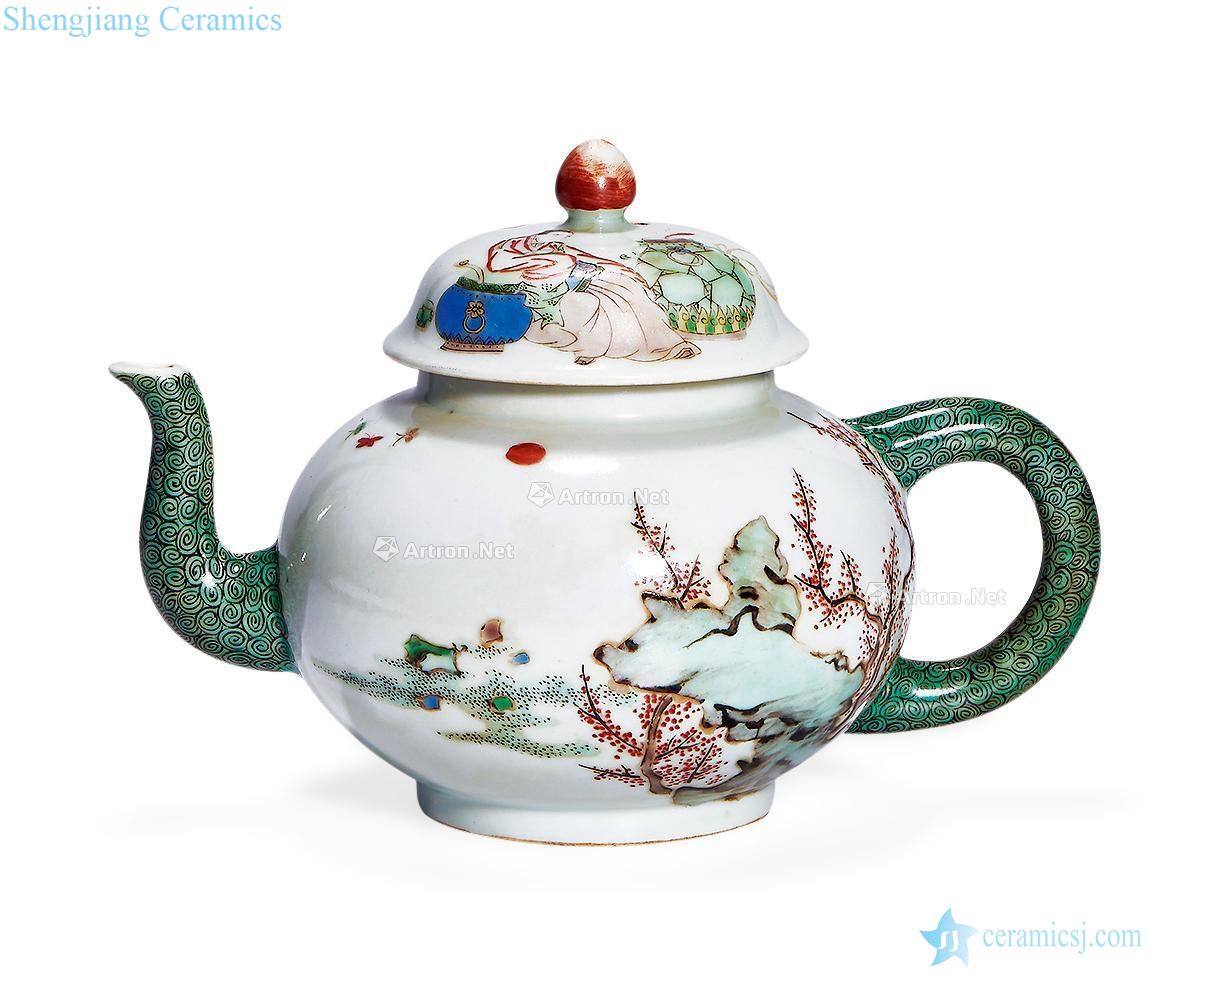 Colorful stories of the teapot